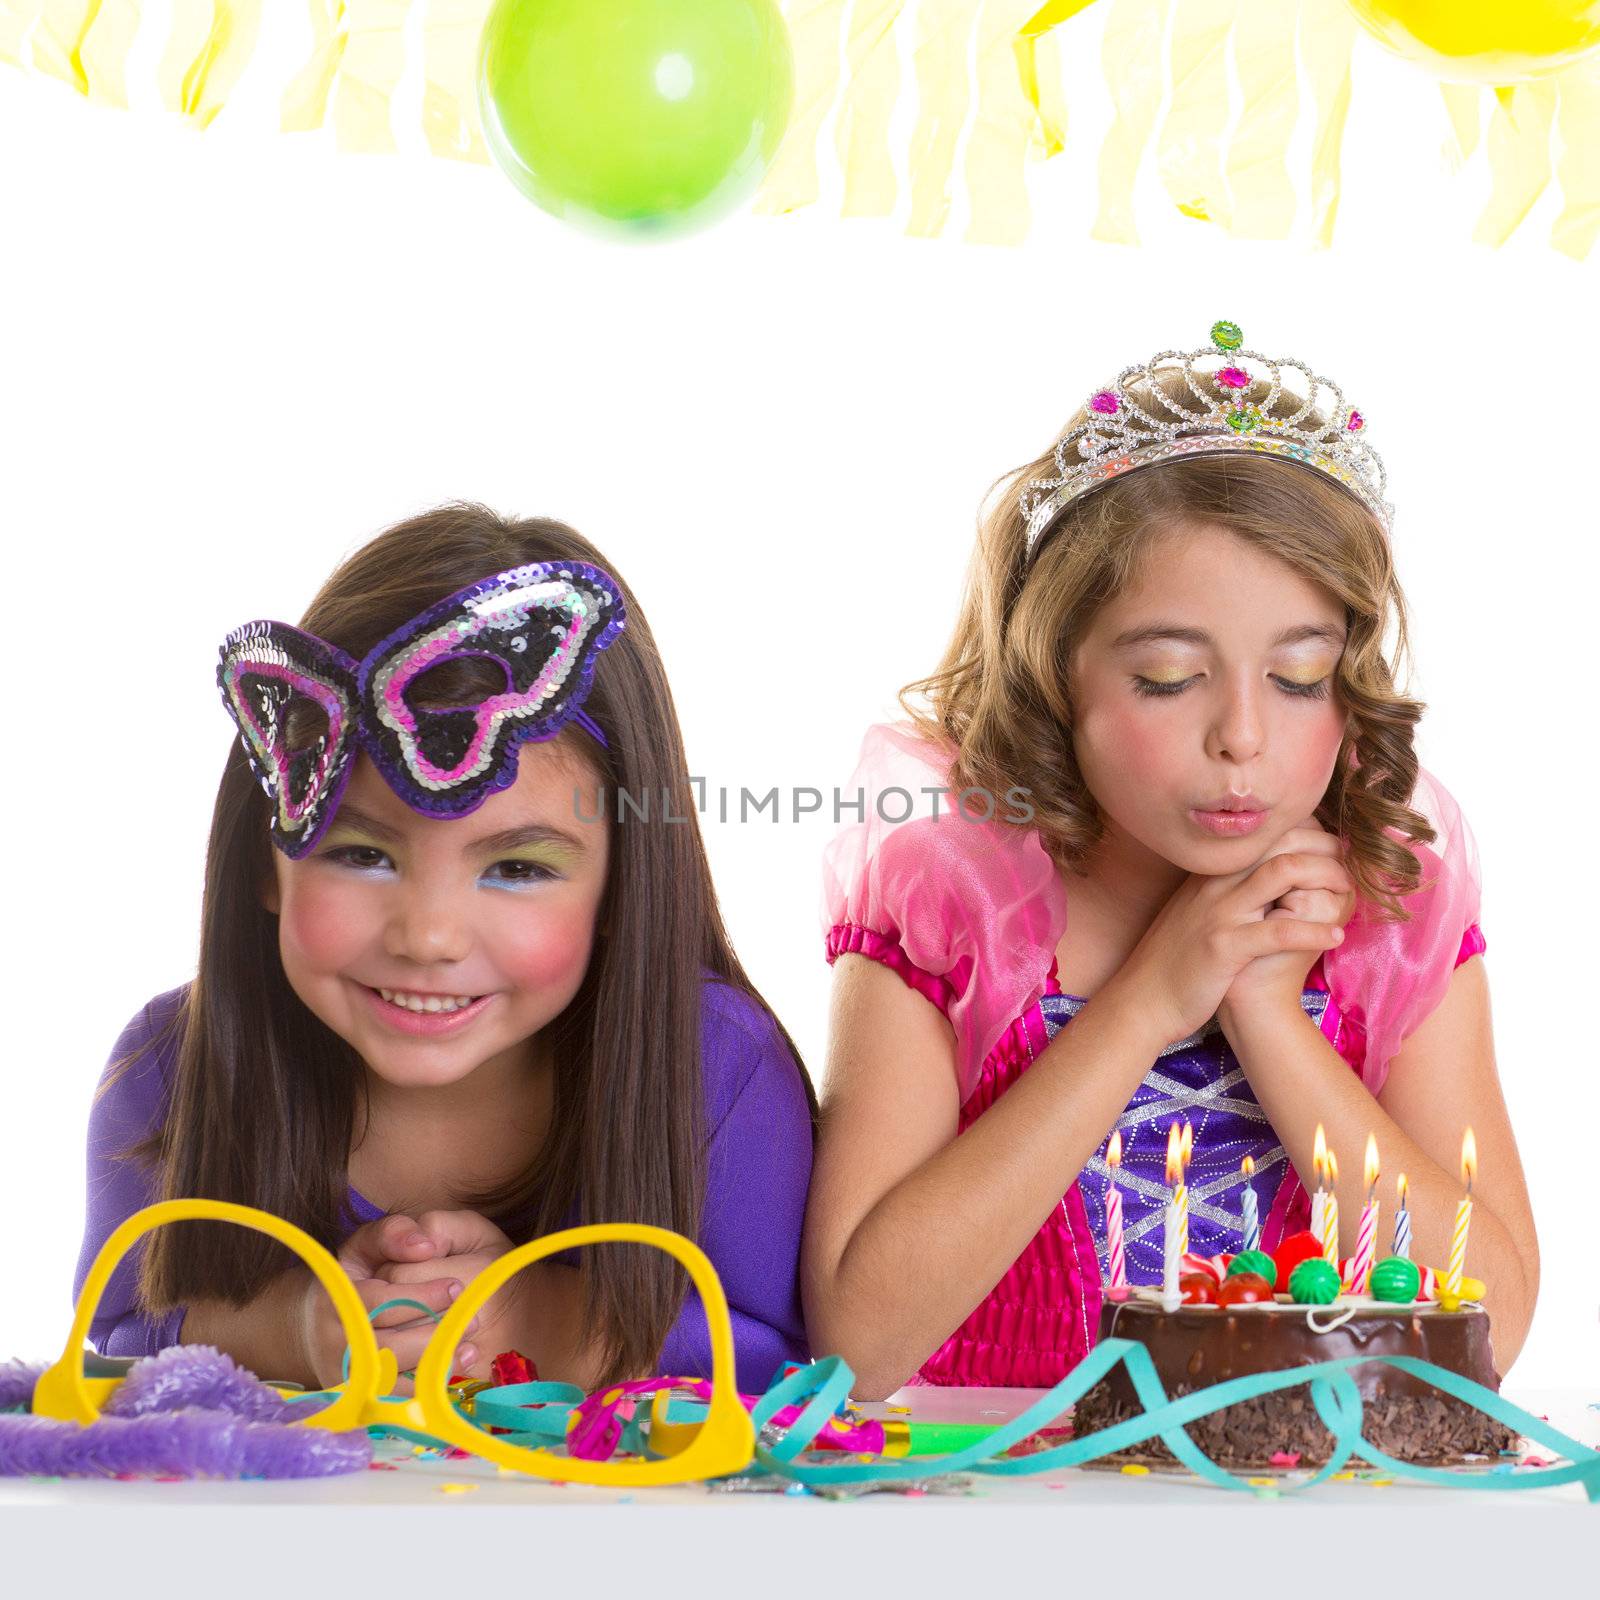 children happy girls blowing birthday party chocolate cake candles